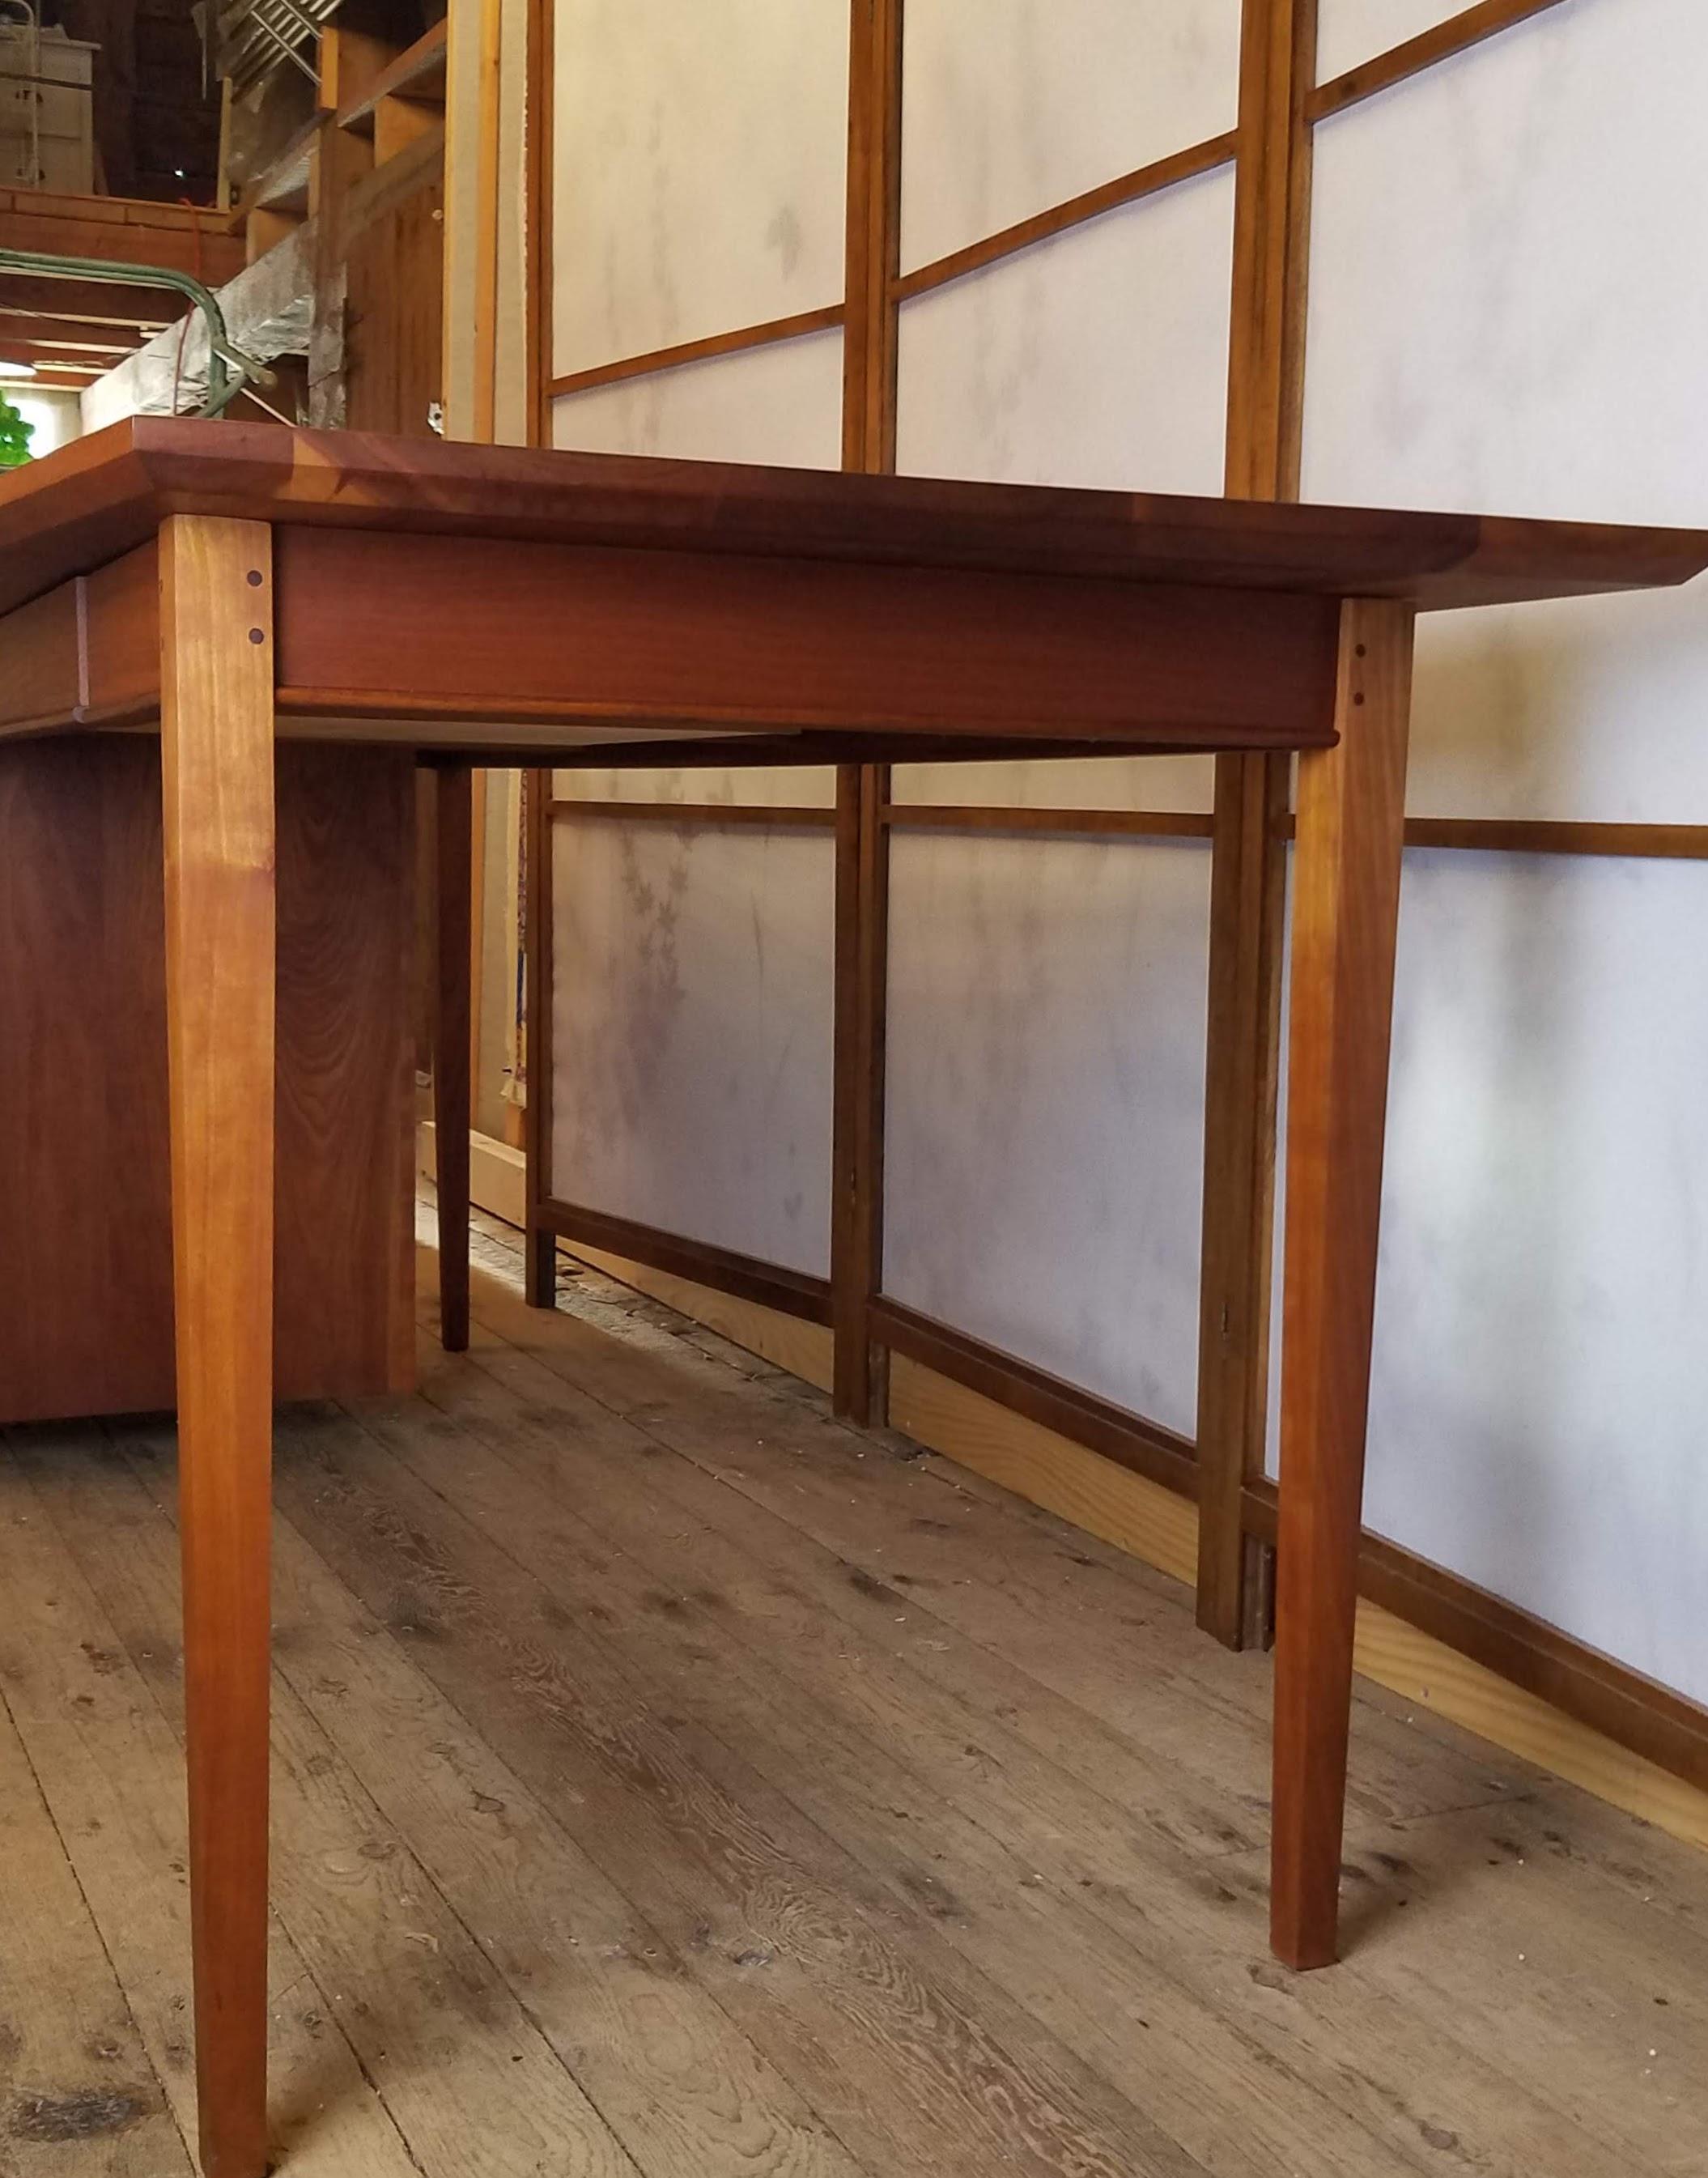 Late 20th Century Bowed Front Solid Cherry Desk with Suspended Drawers Maine Studio 1980s For Sale